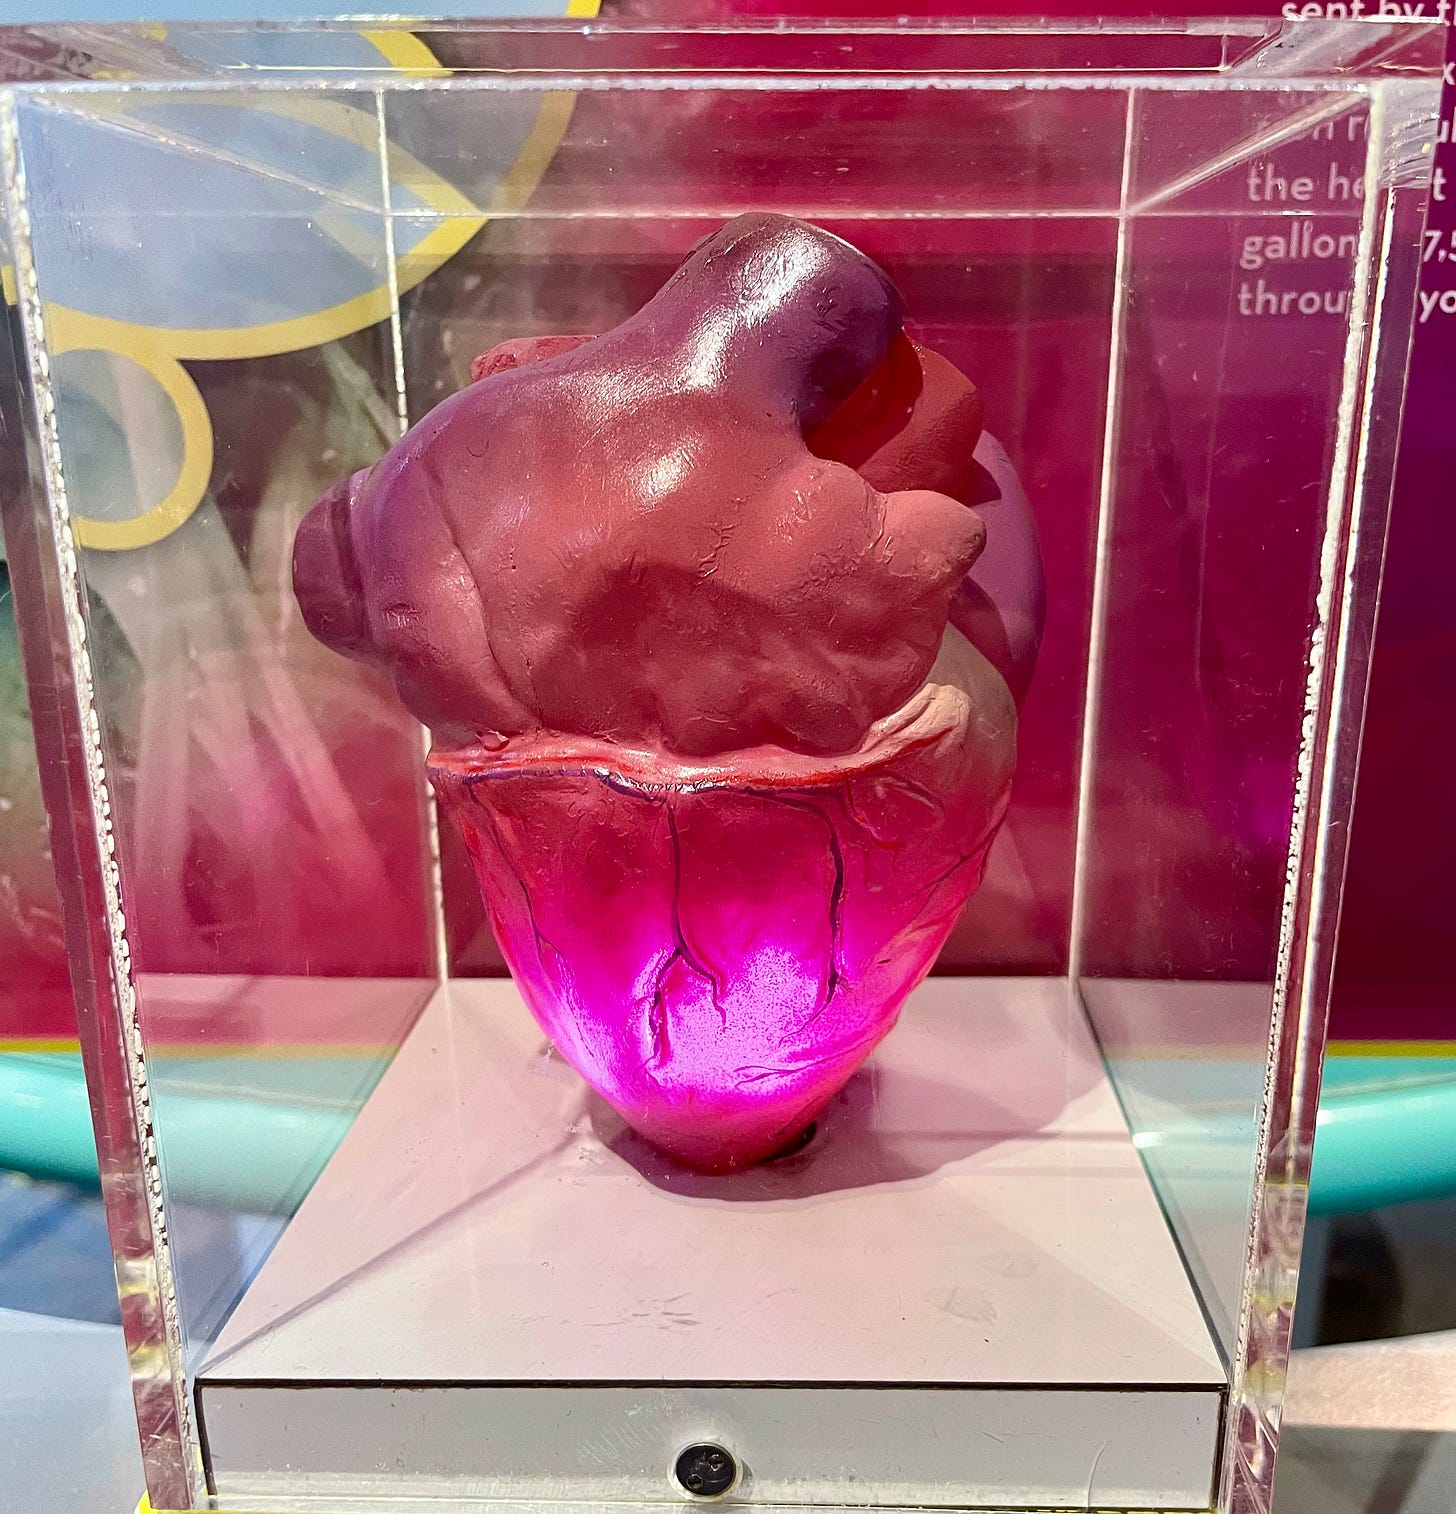 A plastic replica of a human heart inside a glass box. The heart is glowing pink at the bottom from an inner light, and you can see veins around the heart.